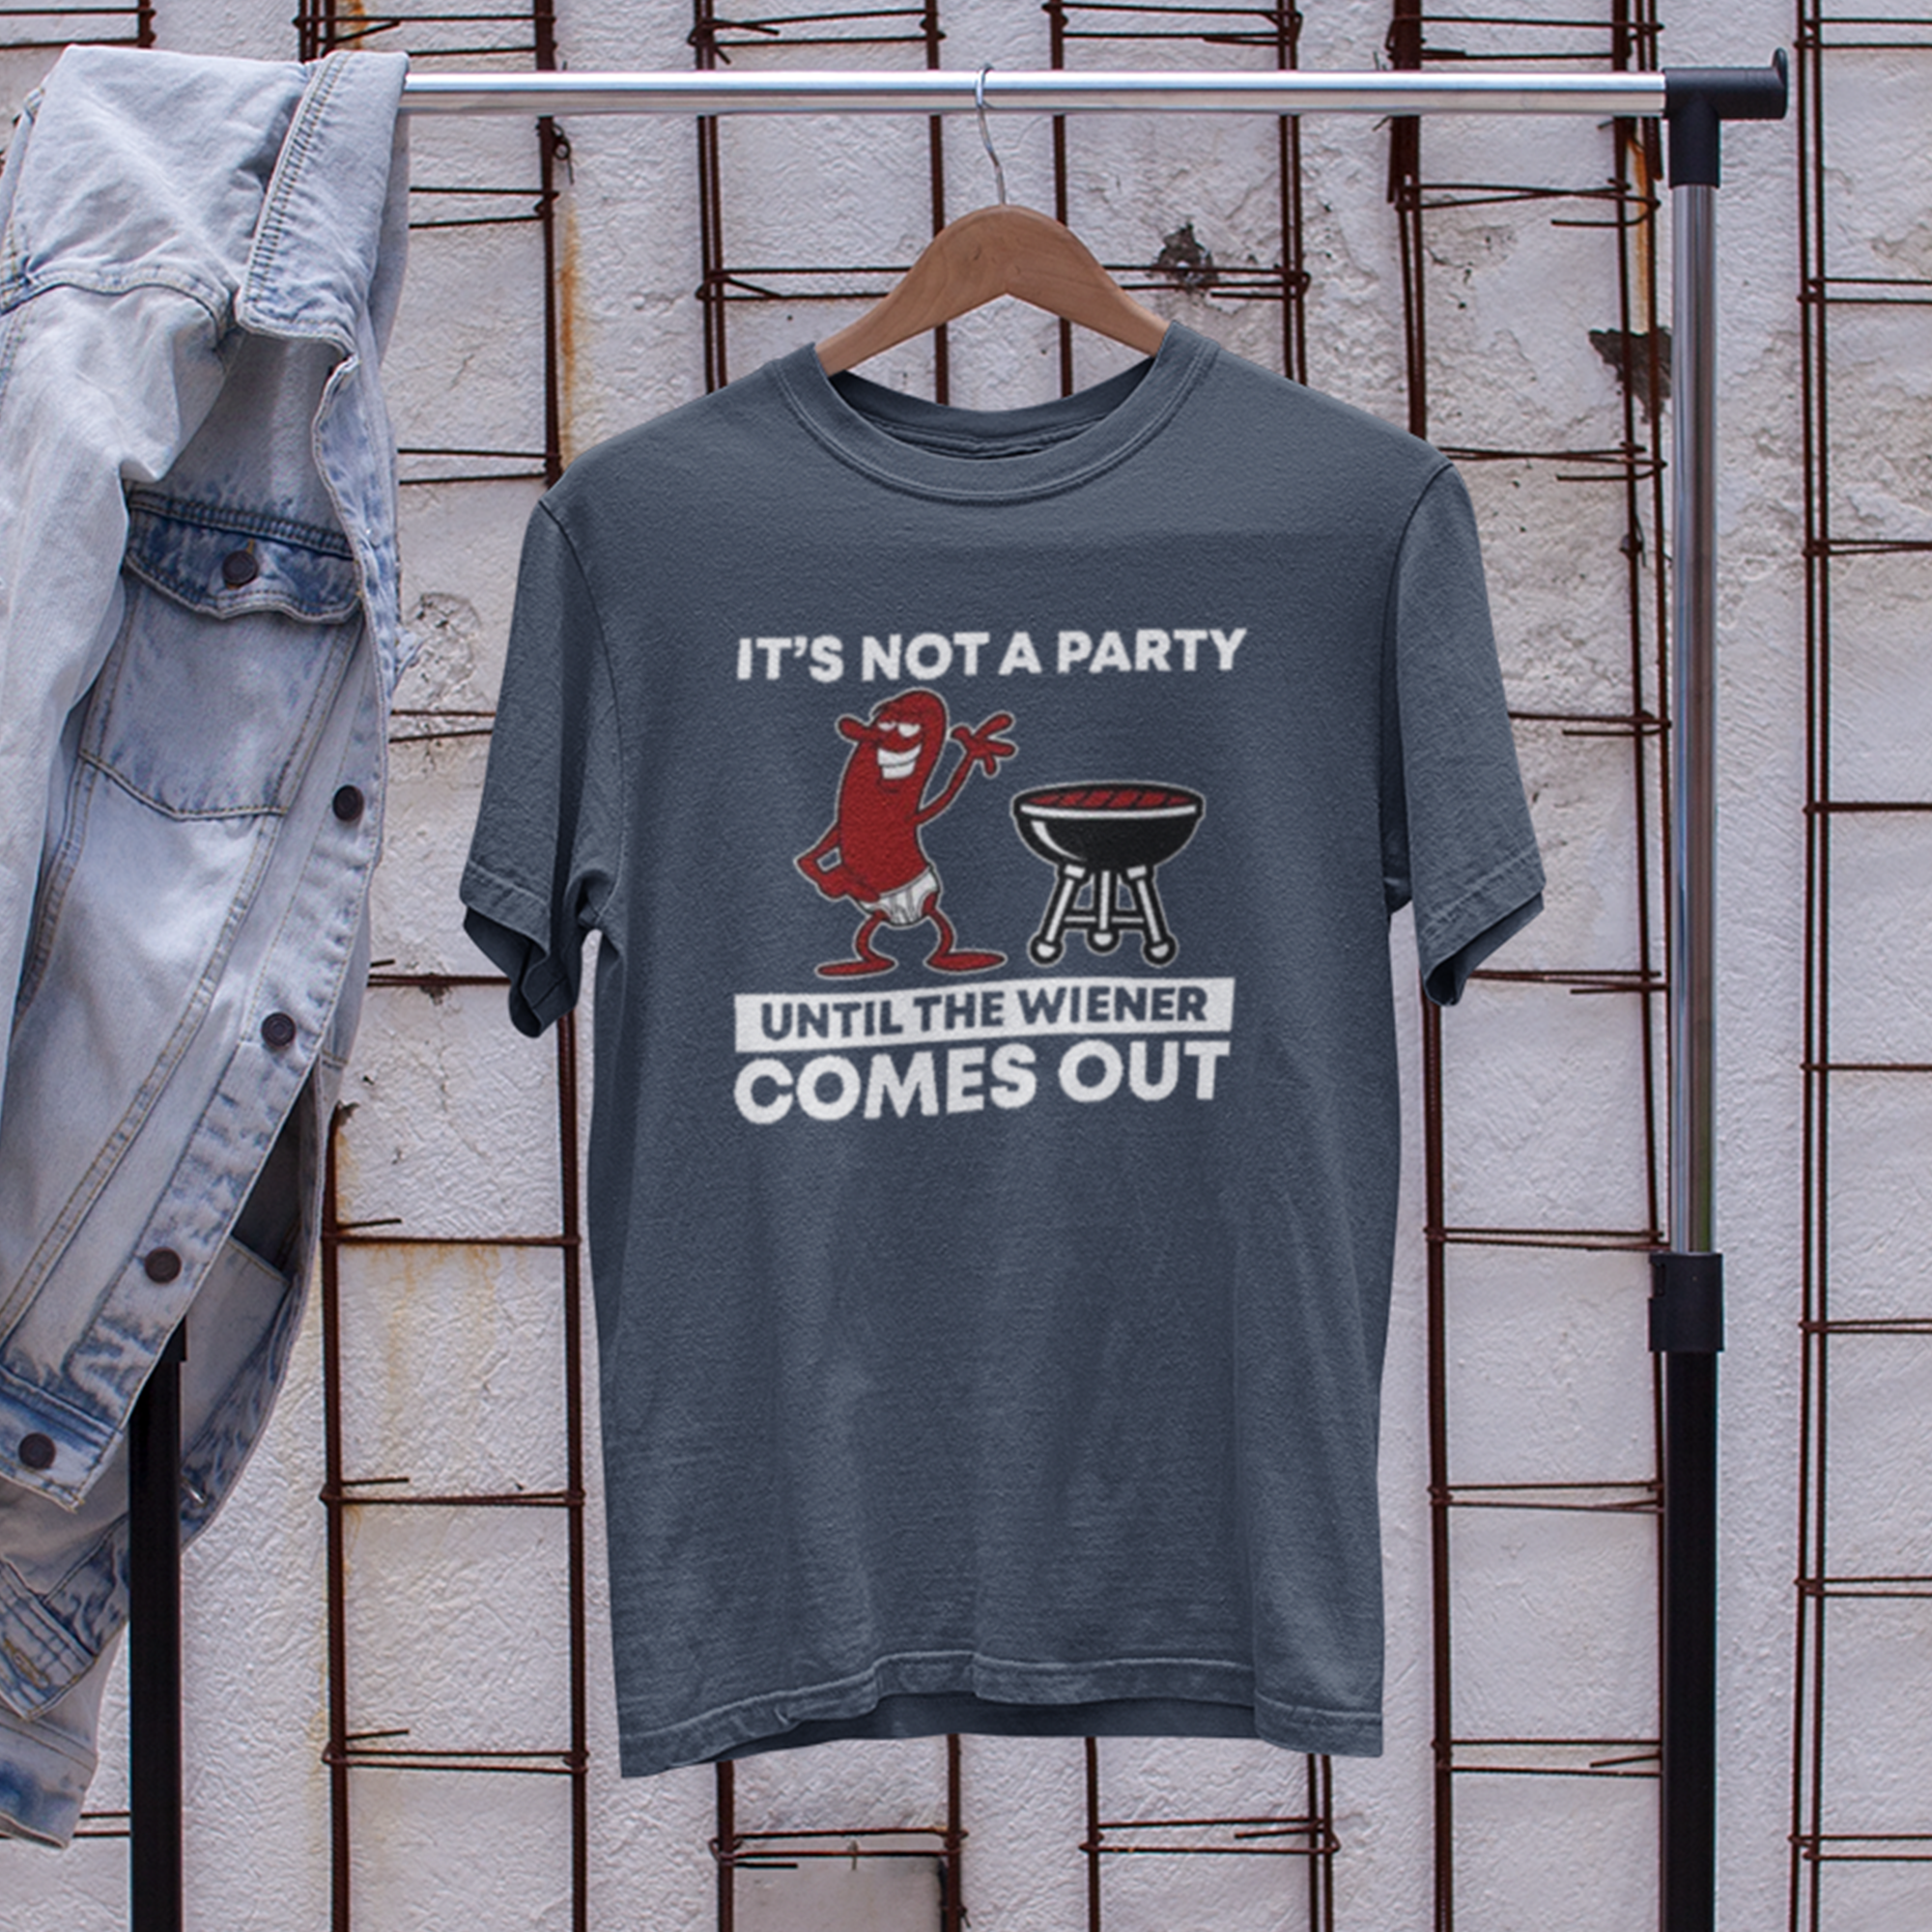 It’s Not A Party Until The Wiener Comes Out Shirt, Funny Shirt